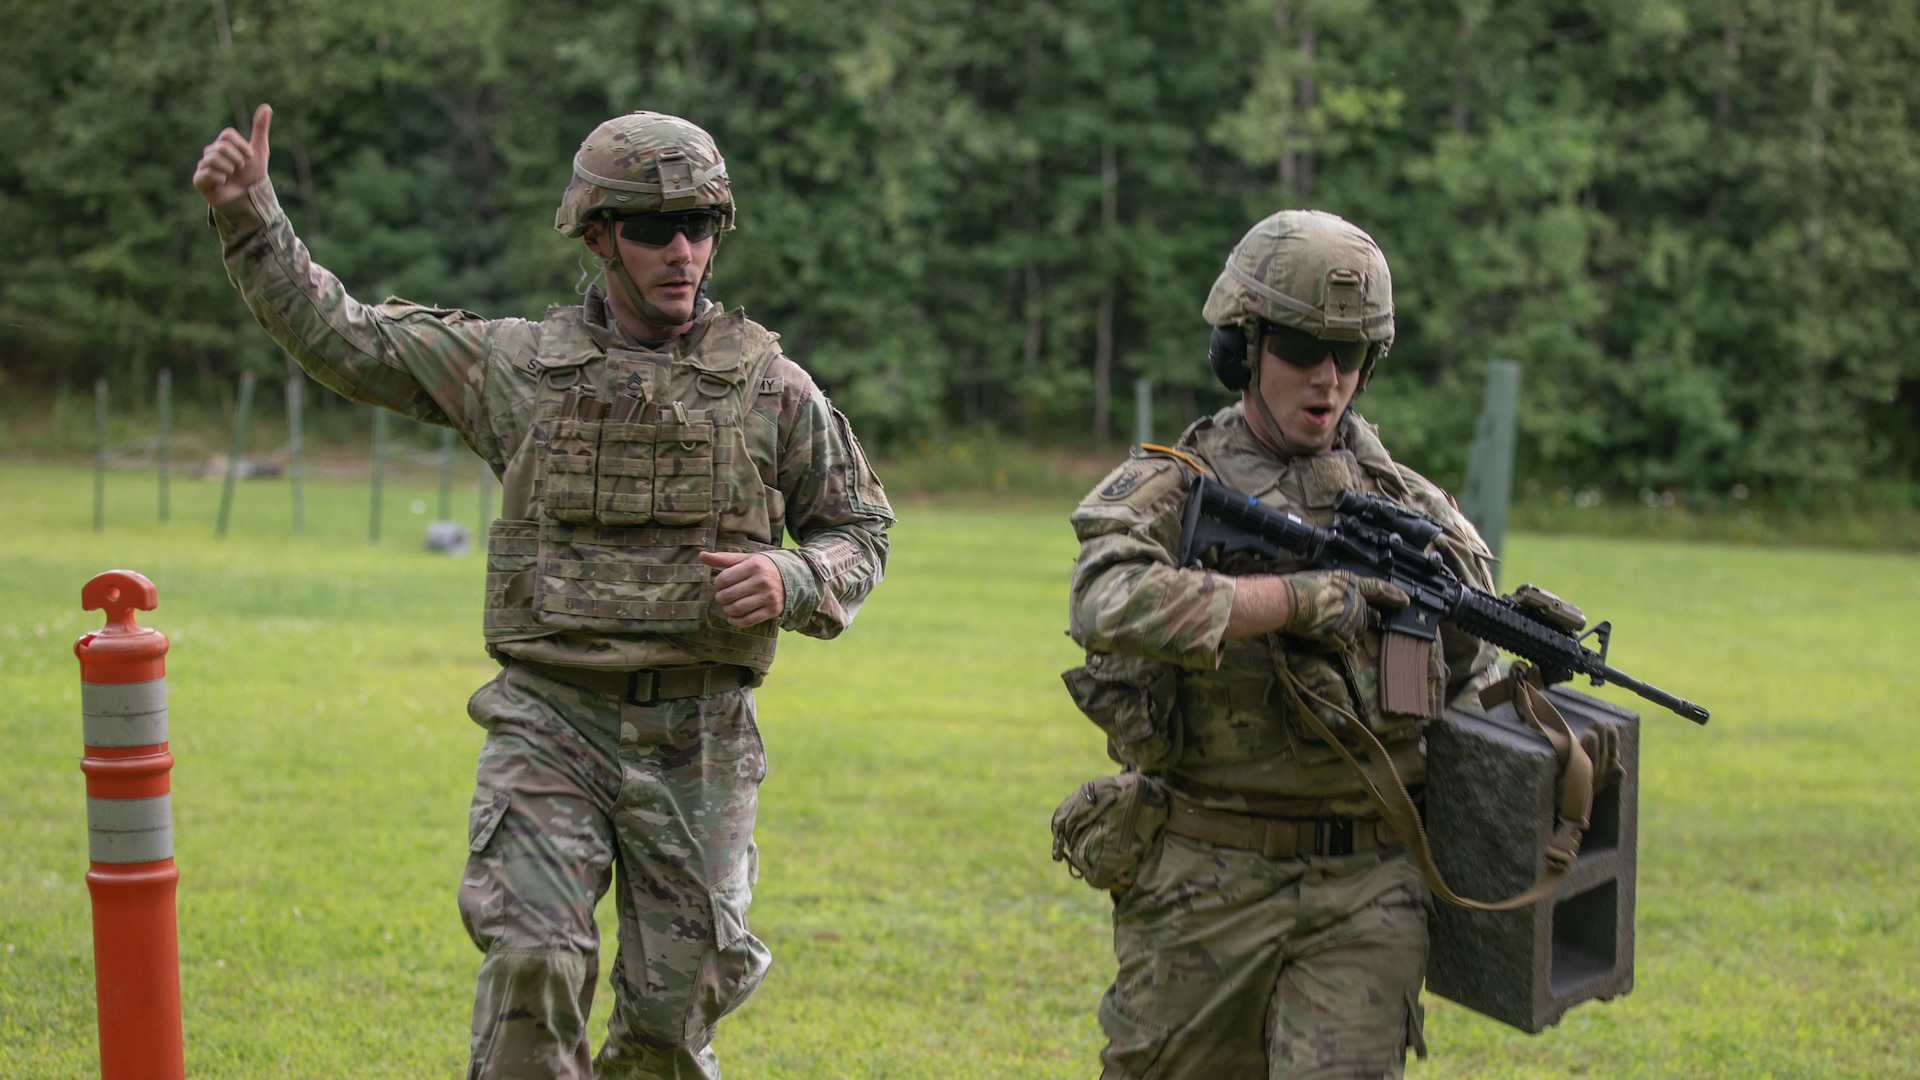 U.S. Army Soldiers of Alpha Company, 3rd Battalion, 172nd Infantry Regiment (Mountain), 86th Infantry Brigade Combat Team (Mountain), Vermont Army National Guard, participate in a stress shooting exercises at the Camp Ethan Allen Training Site in Jericho, Vt., Aug. 13, 2022.